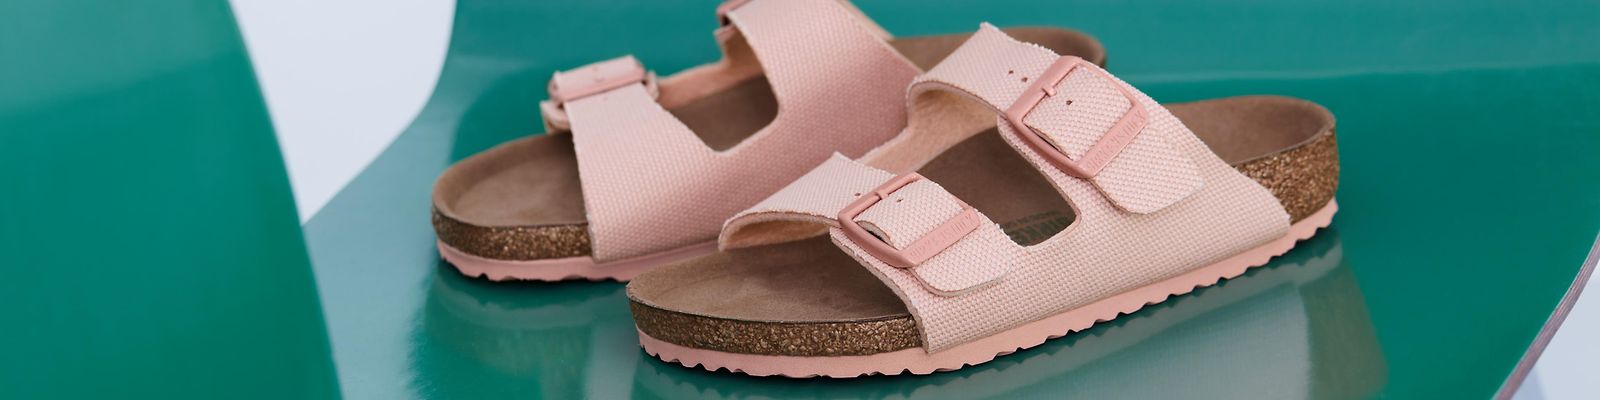 Buy JM LOOKS Peach Women's Fashion Sandals Light weight, Comfortable &  Trendy Flatform Sandals for Girls Casual and Stylish Floaters for Walking,  Working, All Day Wear Online at Best Prices in India -